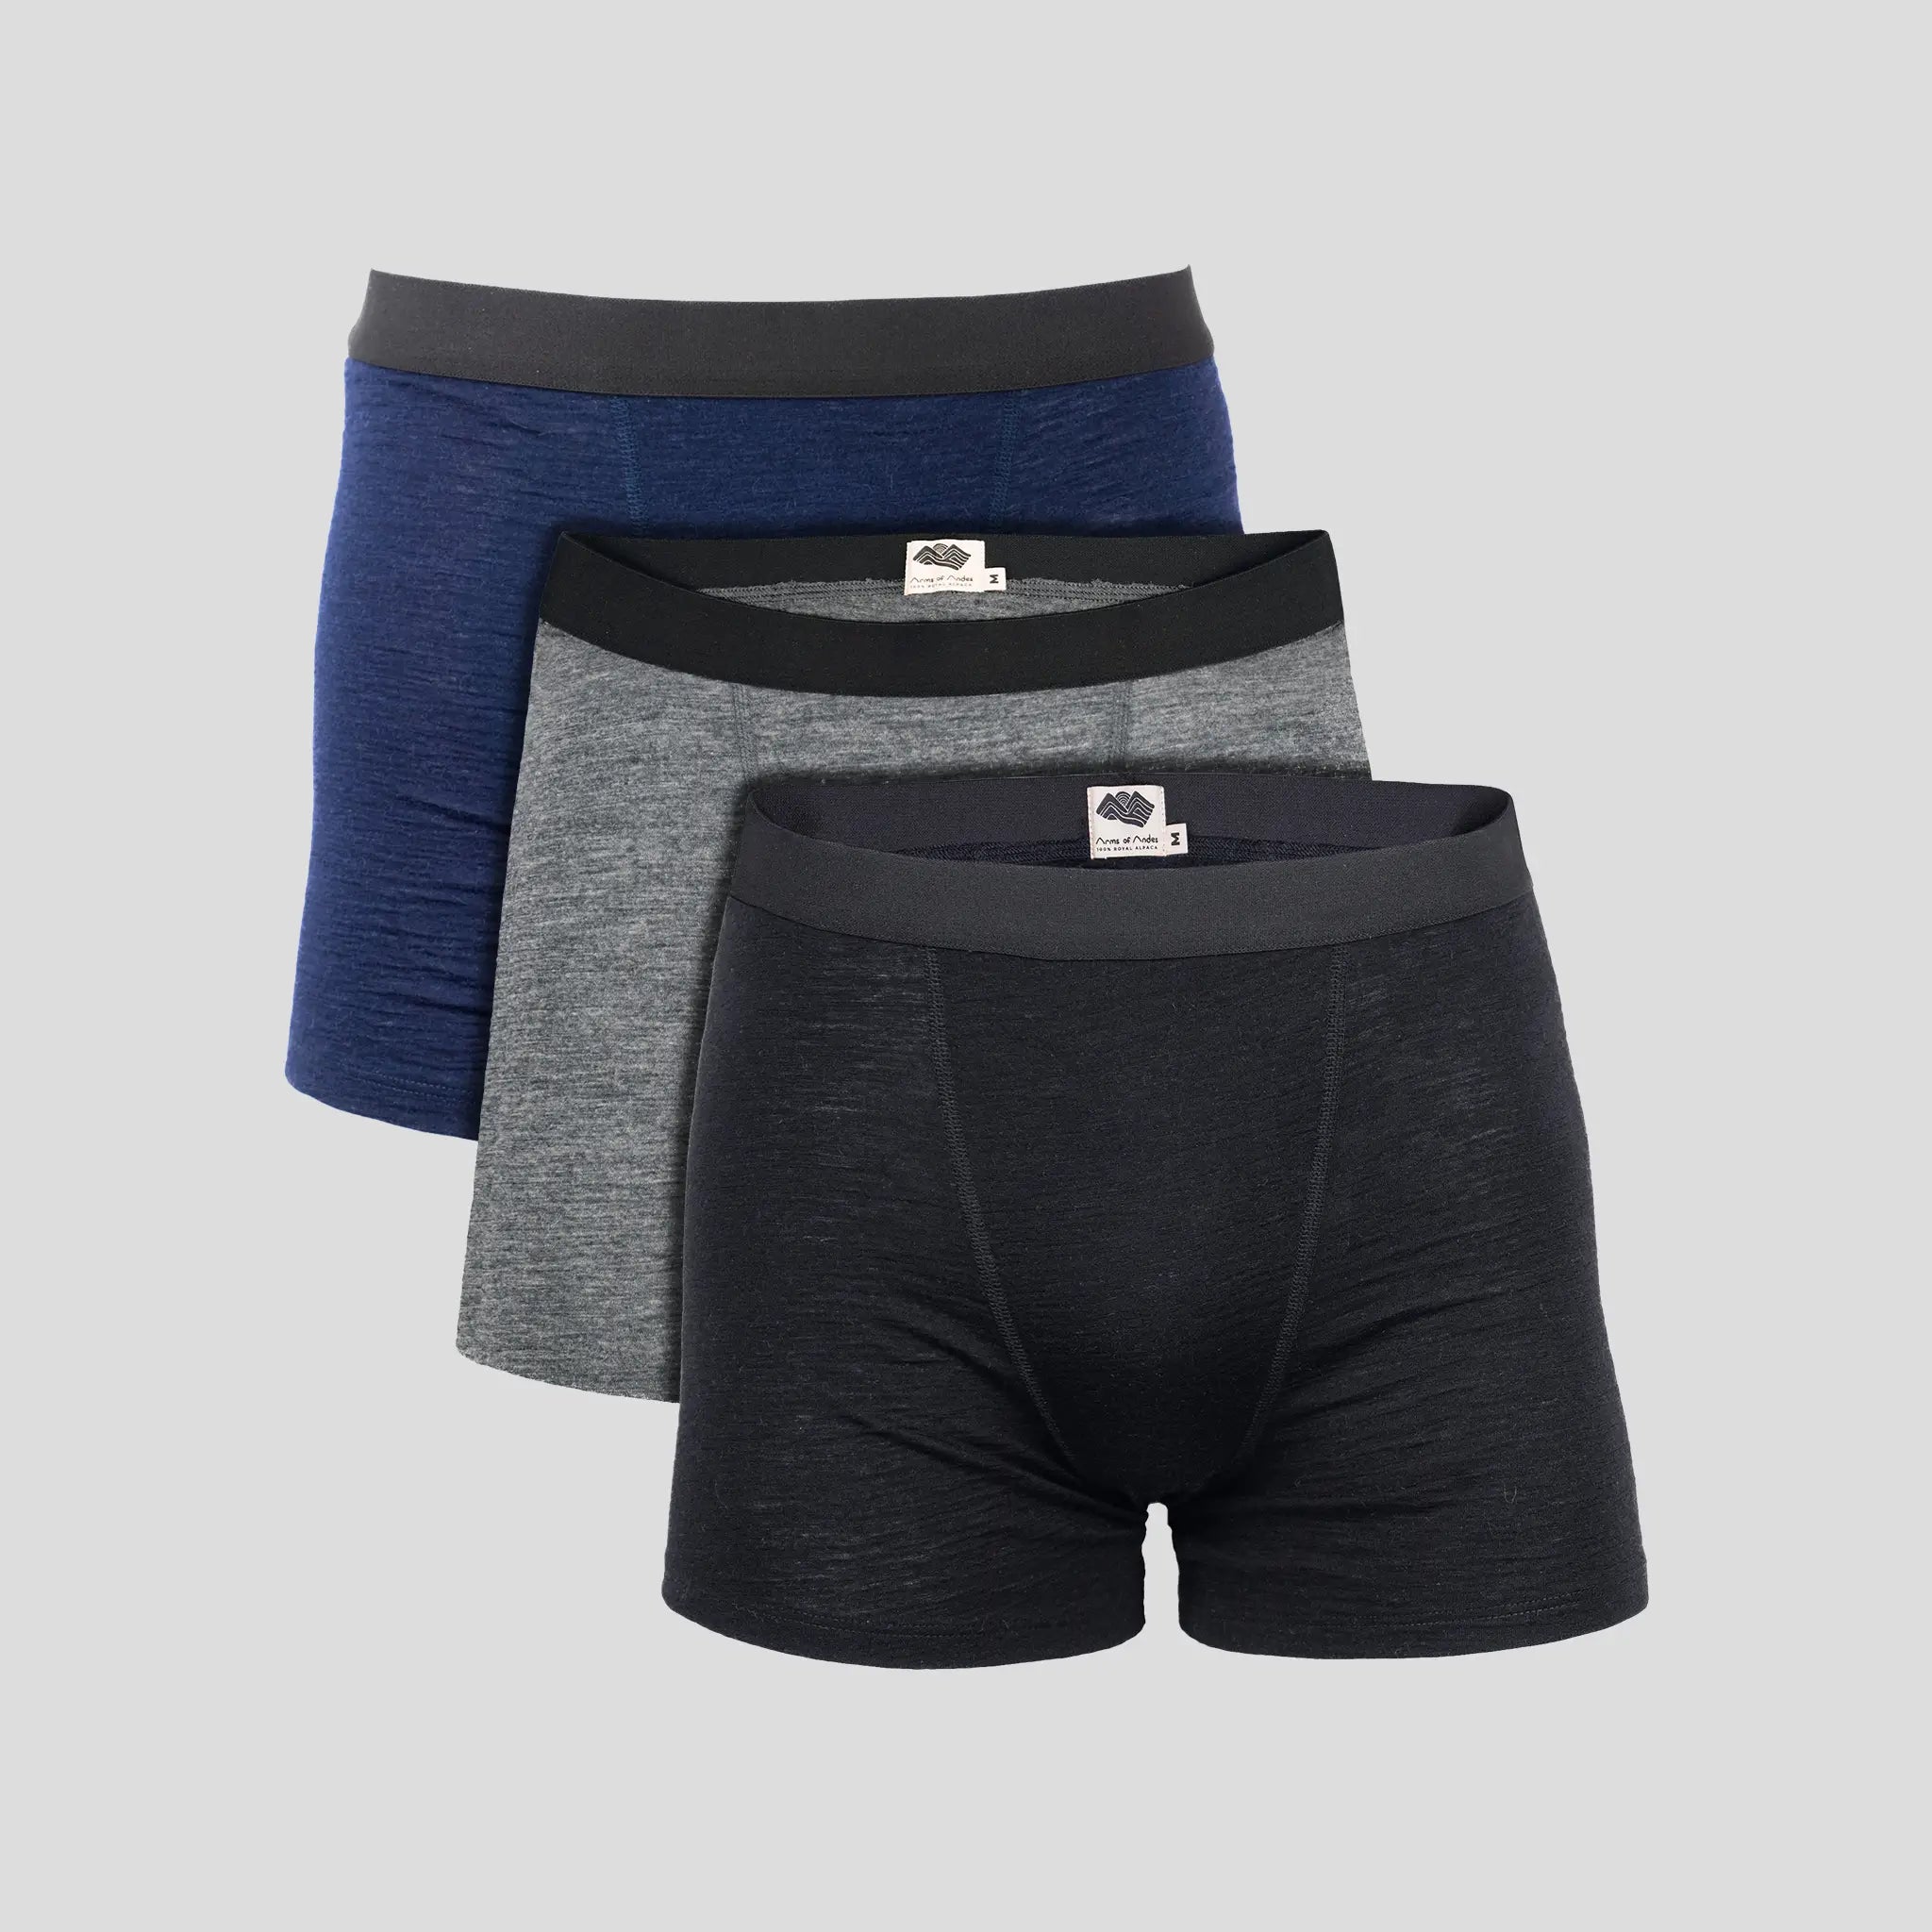 Layer 8 Performance Trunk Boxer Brief - 3-Pack - Men